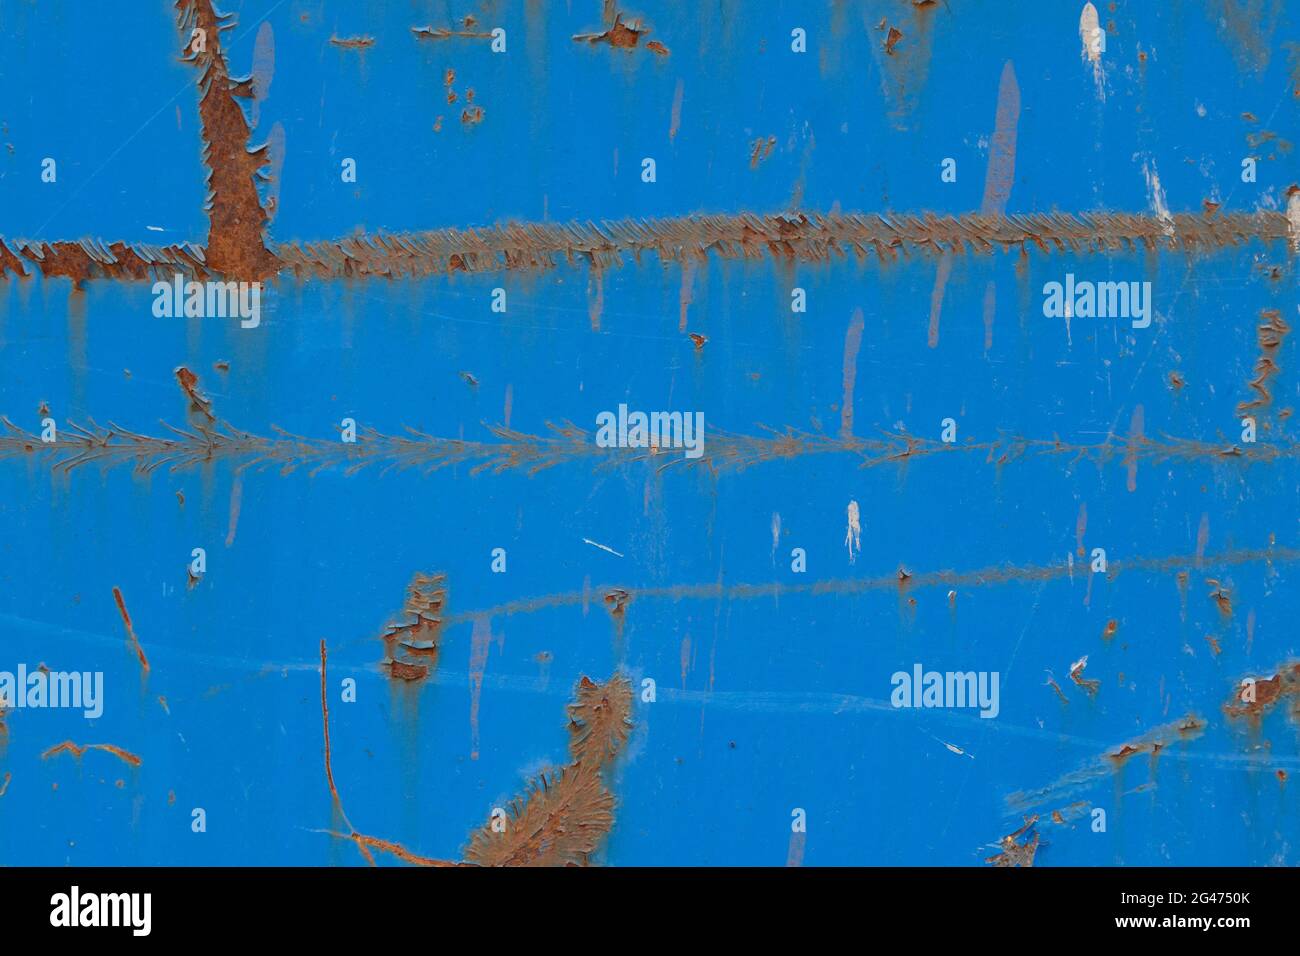 Close-up of a weathered sheet metal plate painted in blue. Paint is partly peeled off revealing rusty metal. Full frame abstract background. Stock Photo